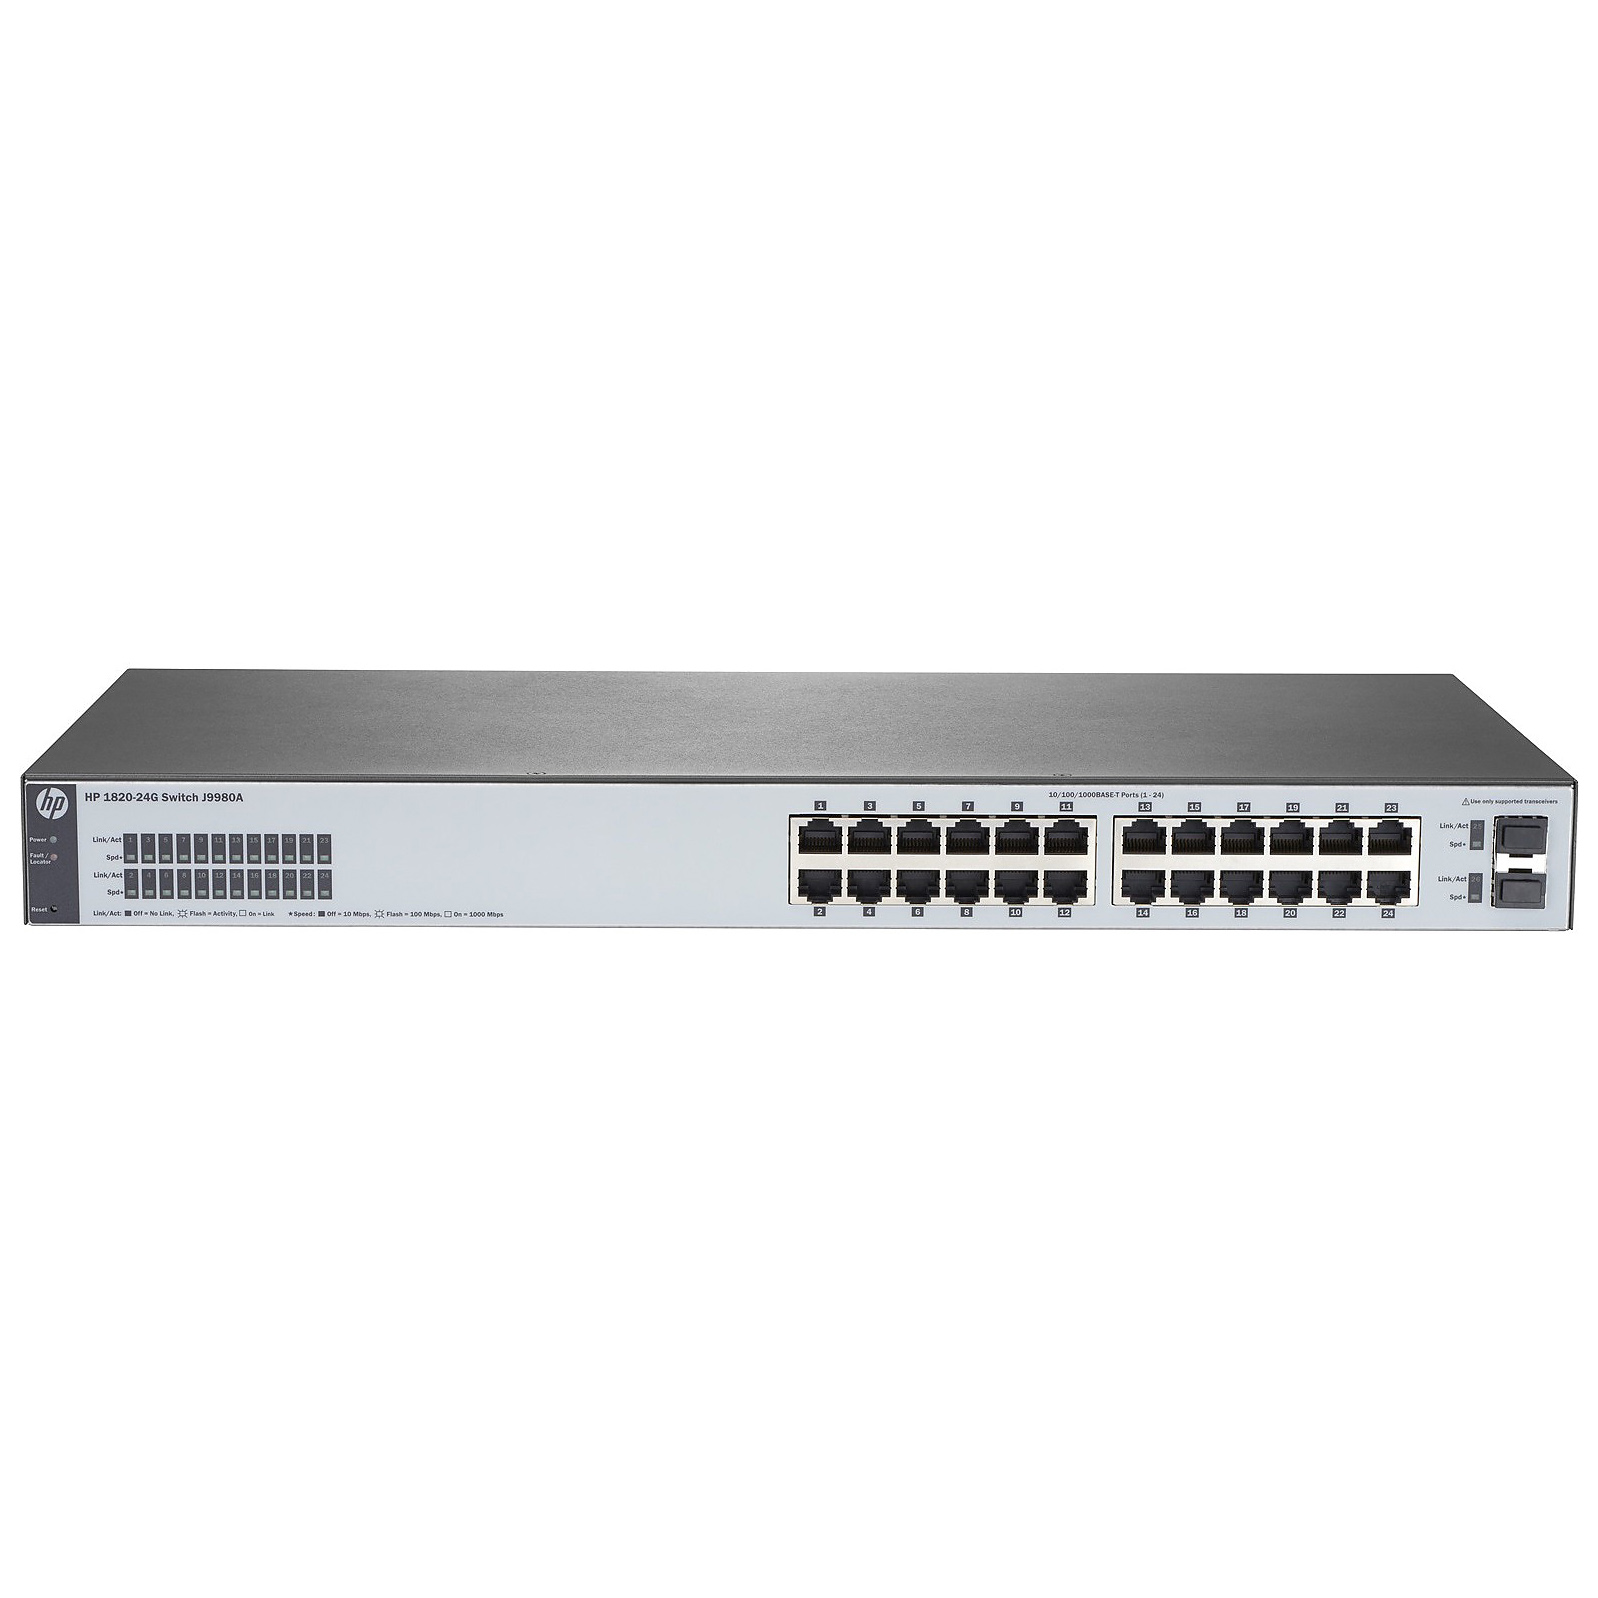 Thiết bị chuyển mạch HPE J9980A OfficeConnect 1820 24G Switch